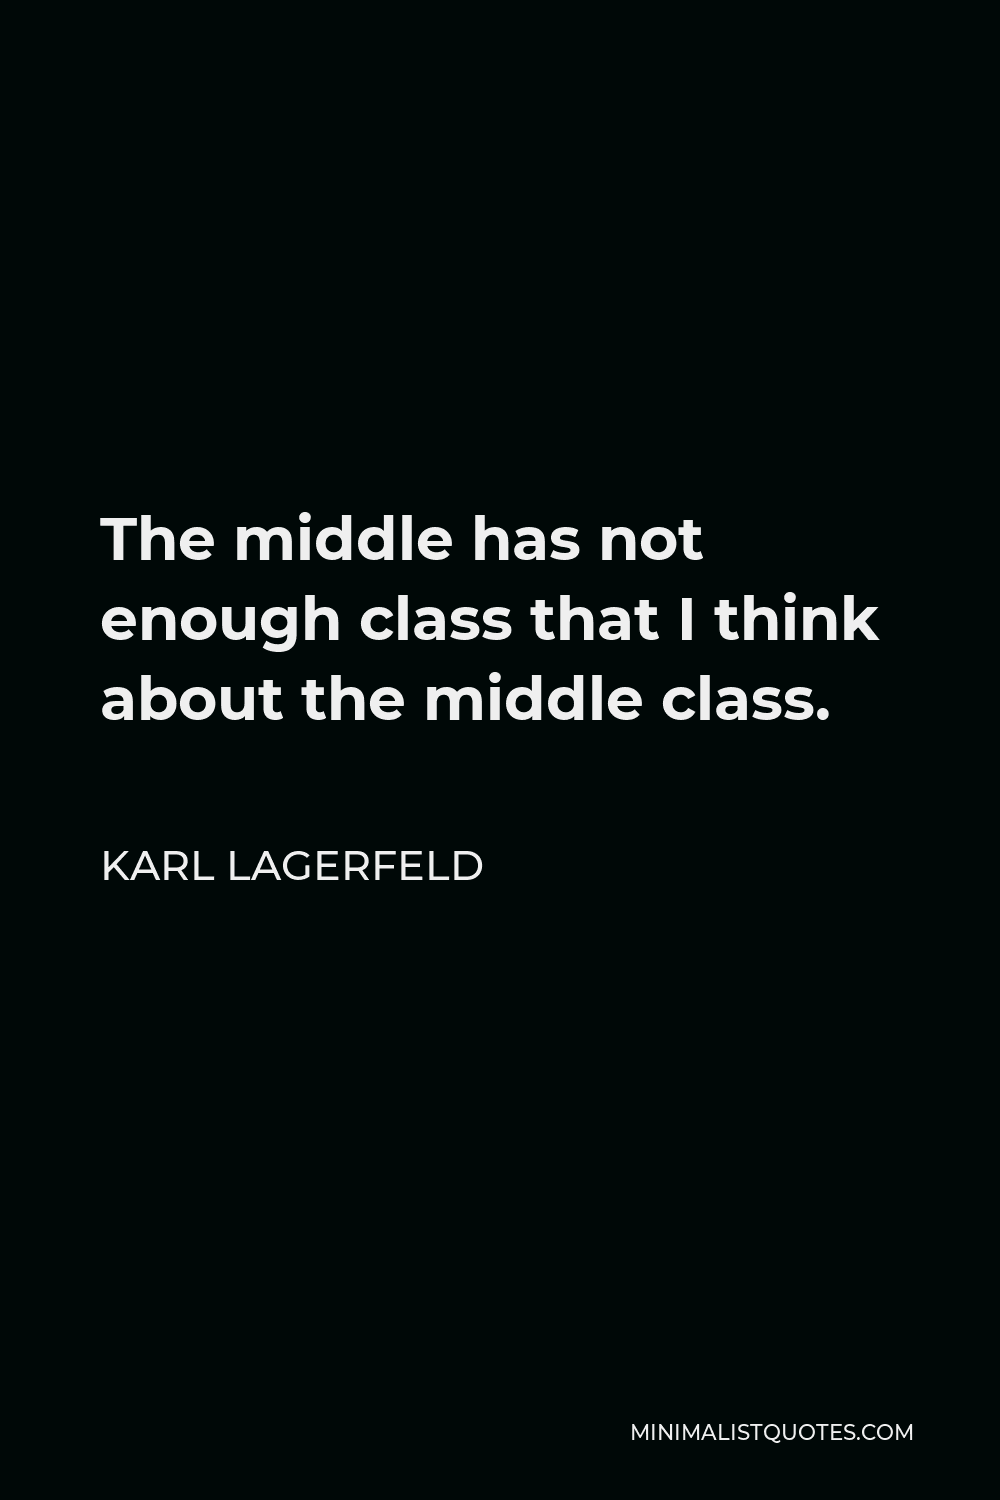 Karl Lagerfeld Quote - The middle has not enough class that I think about the middle class.